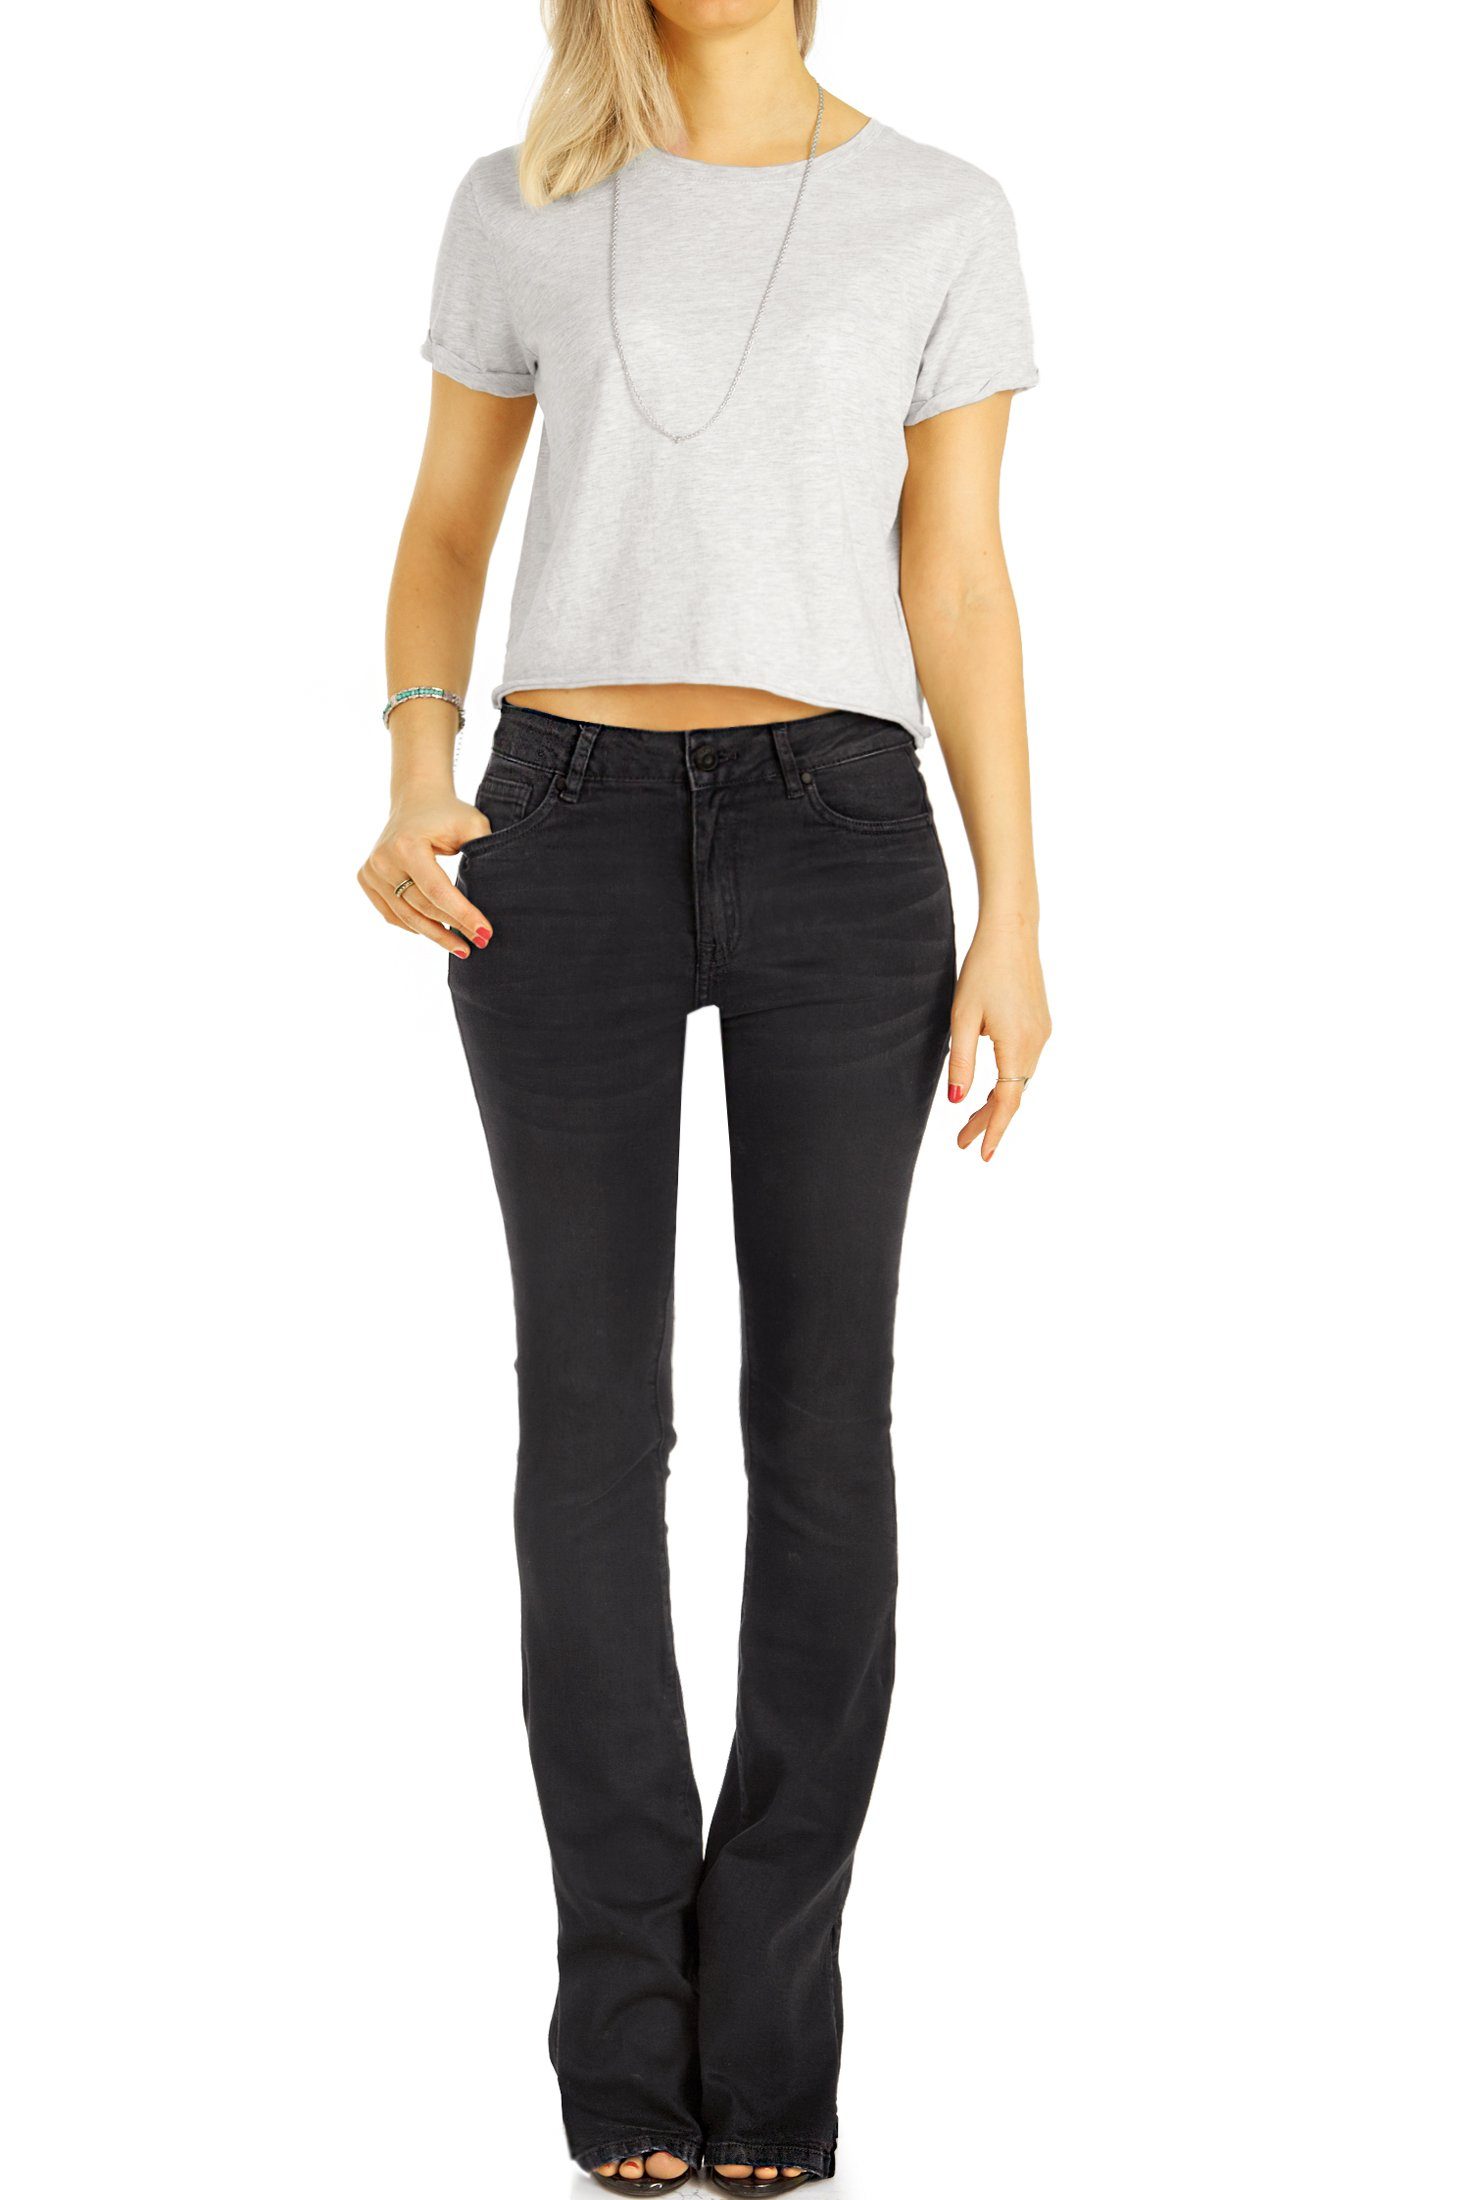 be styled Bootcut-Jeans Bootcut j27r cut mid - Jeans Damen mit Hose out waist - mit 5-Pocket-Style Stretch-Anteil